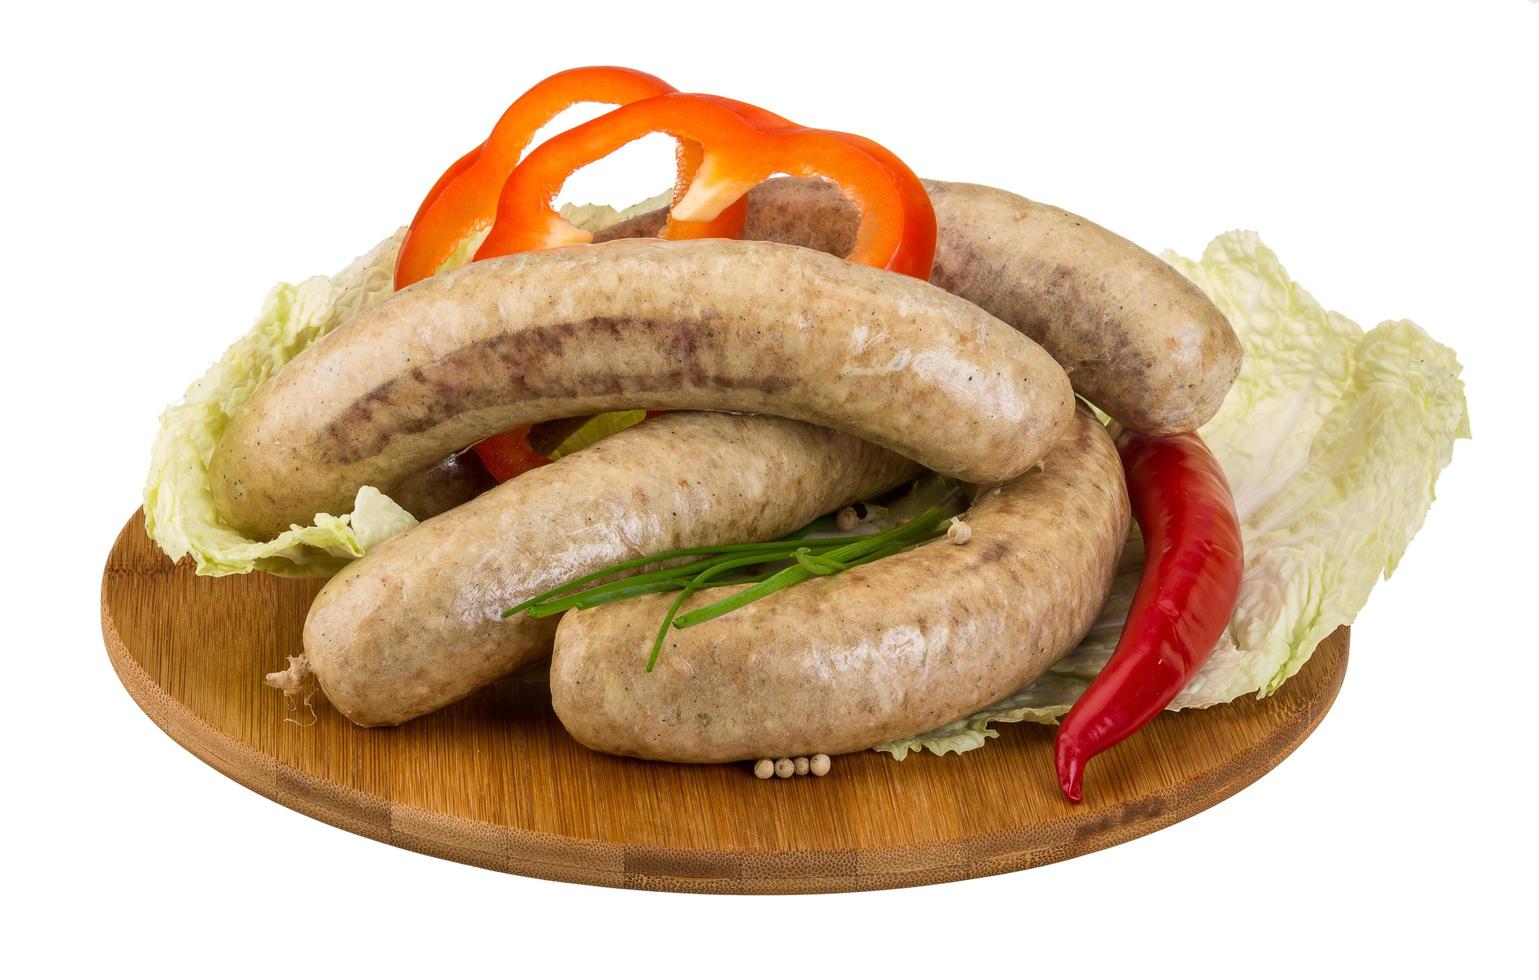 Grilled sausages on wooden board and white background photo